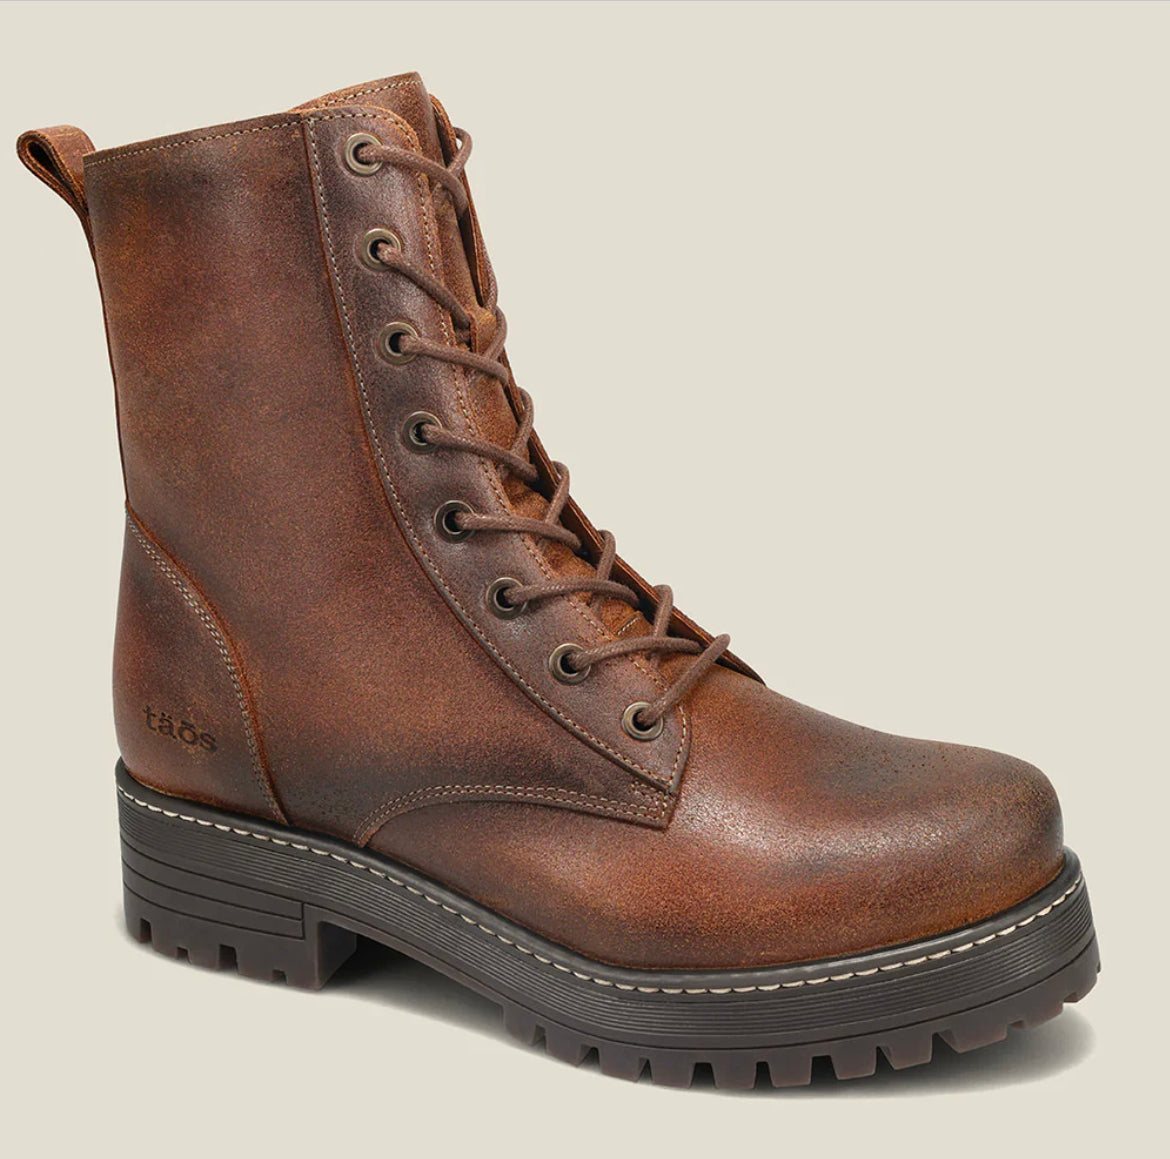 Taos Groupie Cognac Rugged Boot - All Mixed Up 